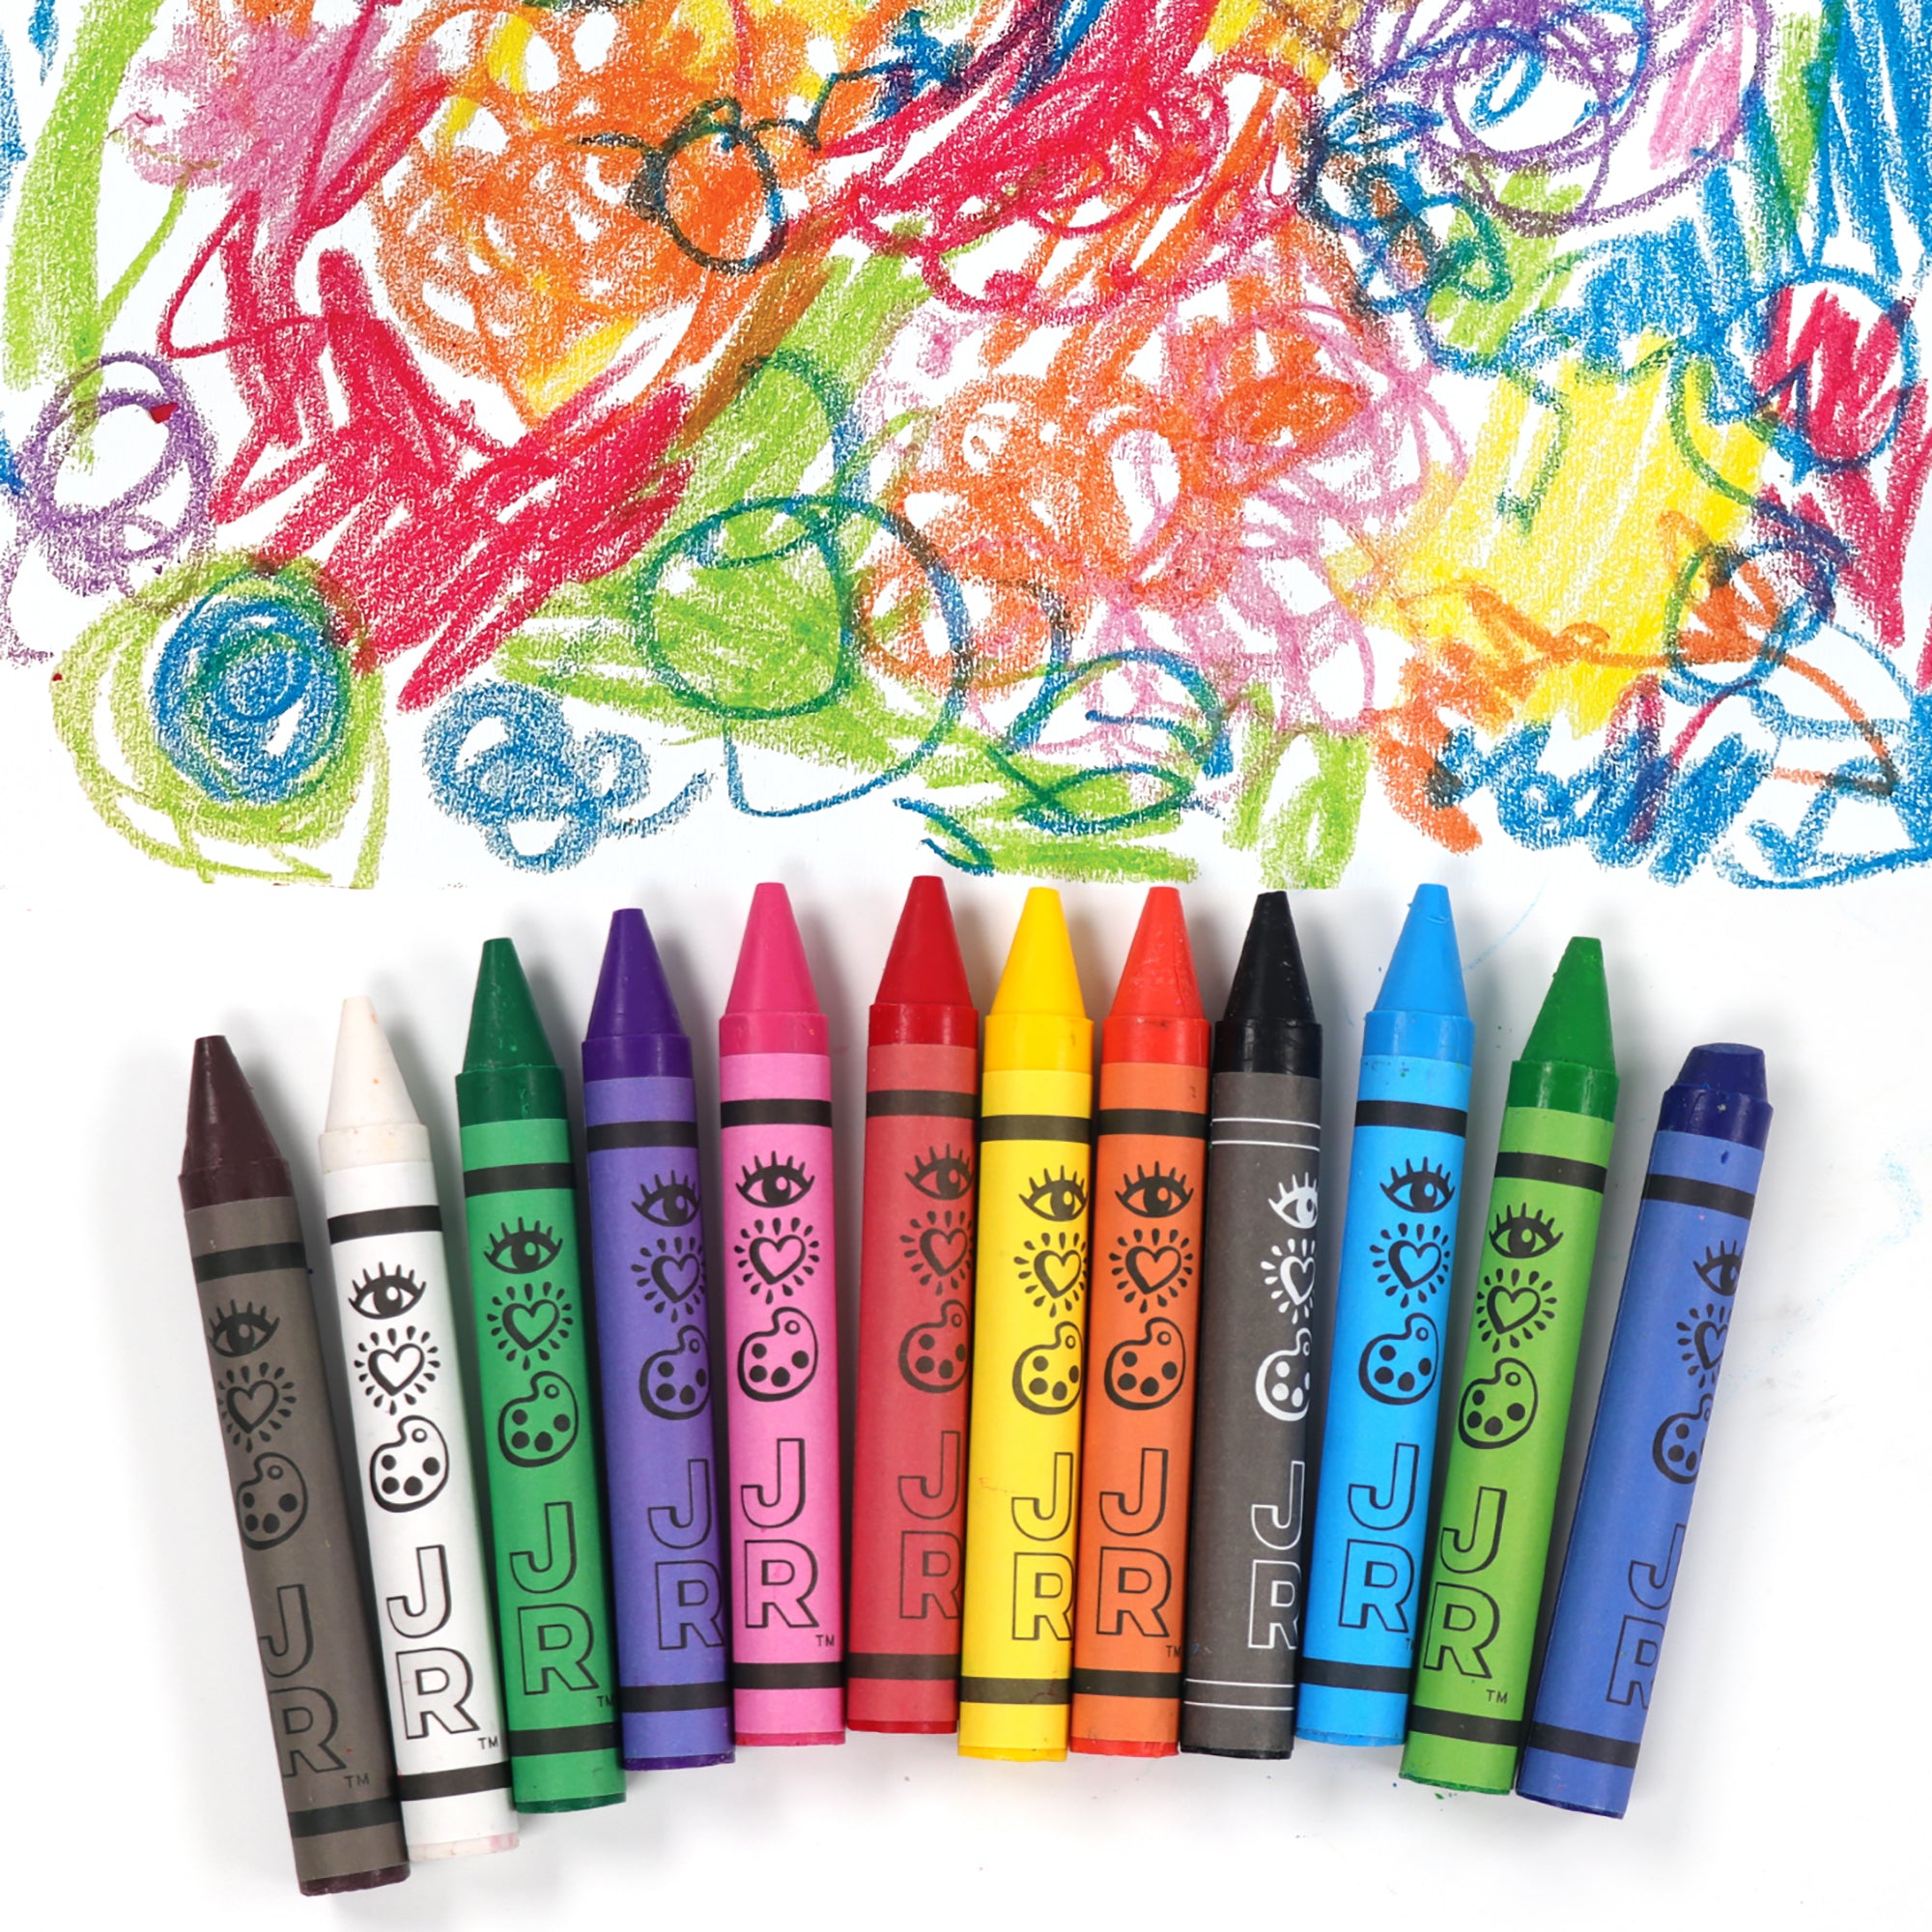 Basics Jumbo Crayons for Toddlers, 12 Count, Multicolor